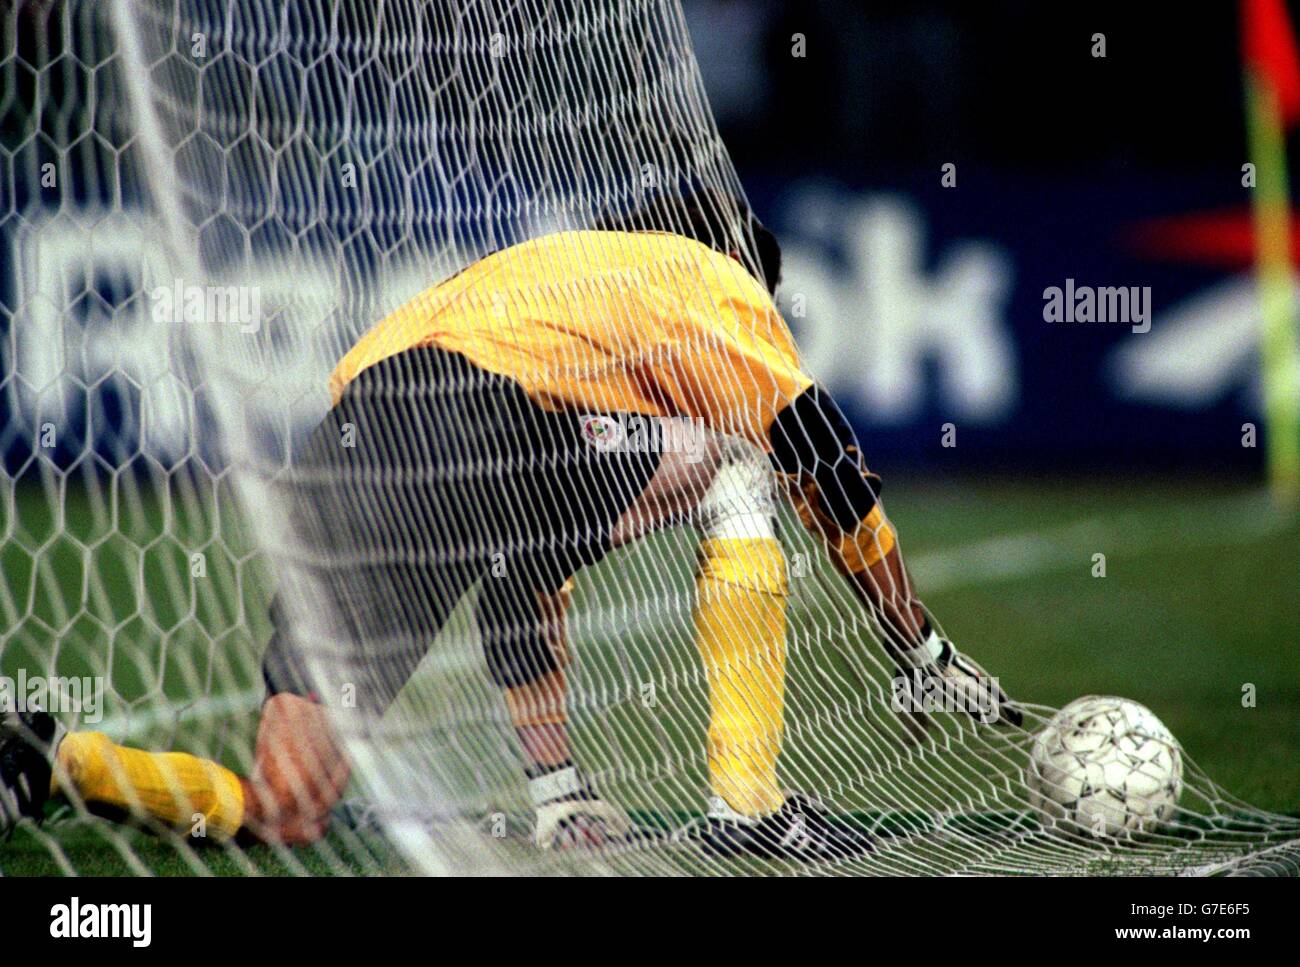 UEFA Champions League Soccer ... Juventus v Fenerbahce. Fenerbahce's Rustu picking the ball out of the back of the net Stock Photo